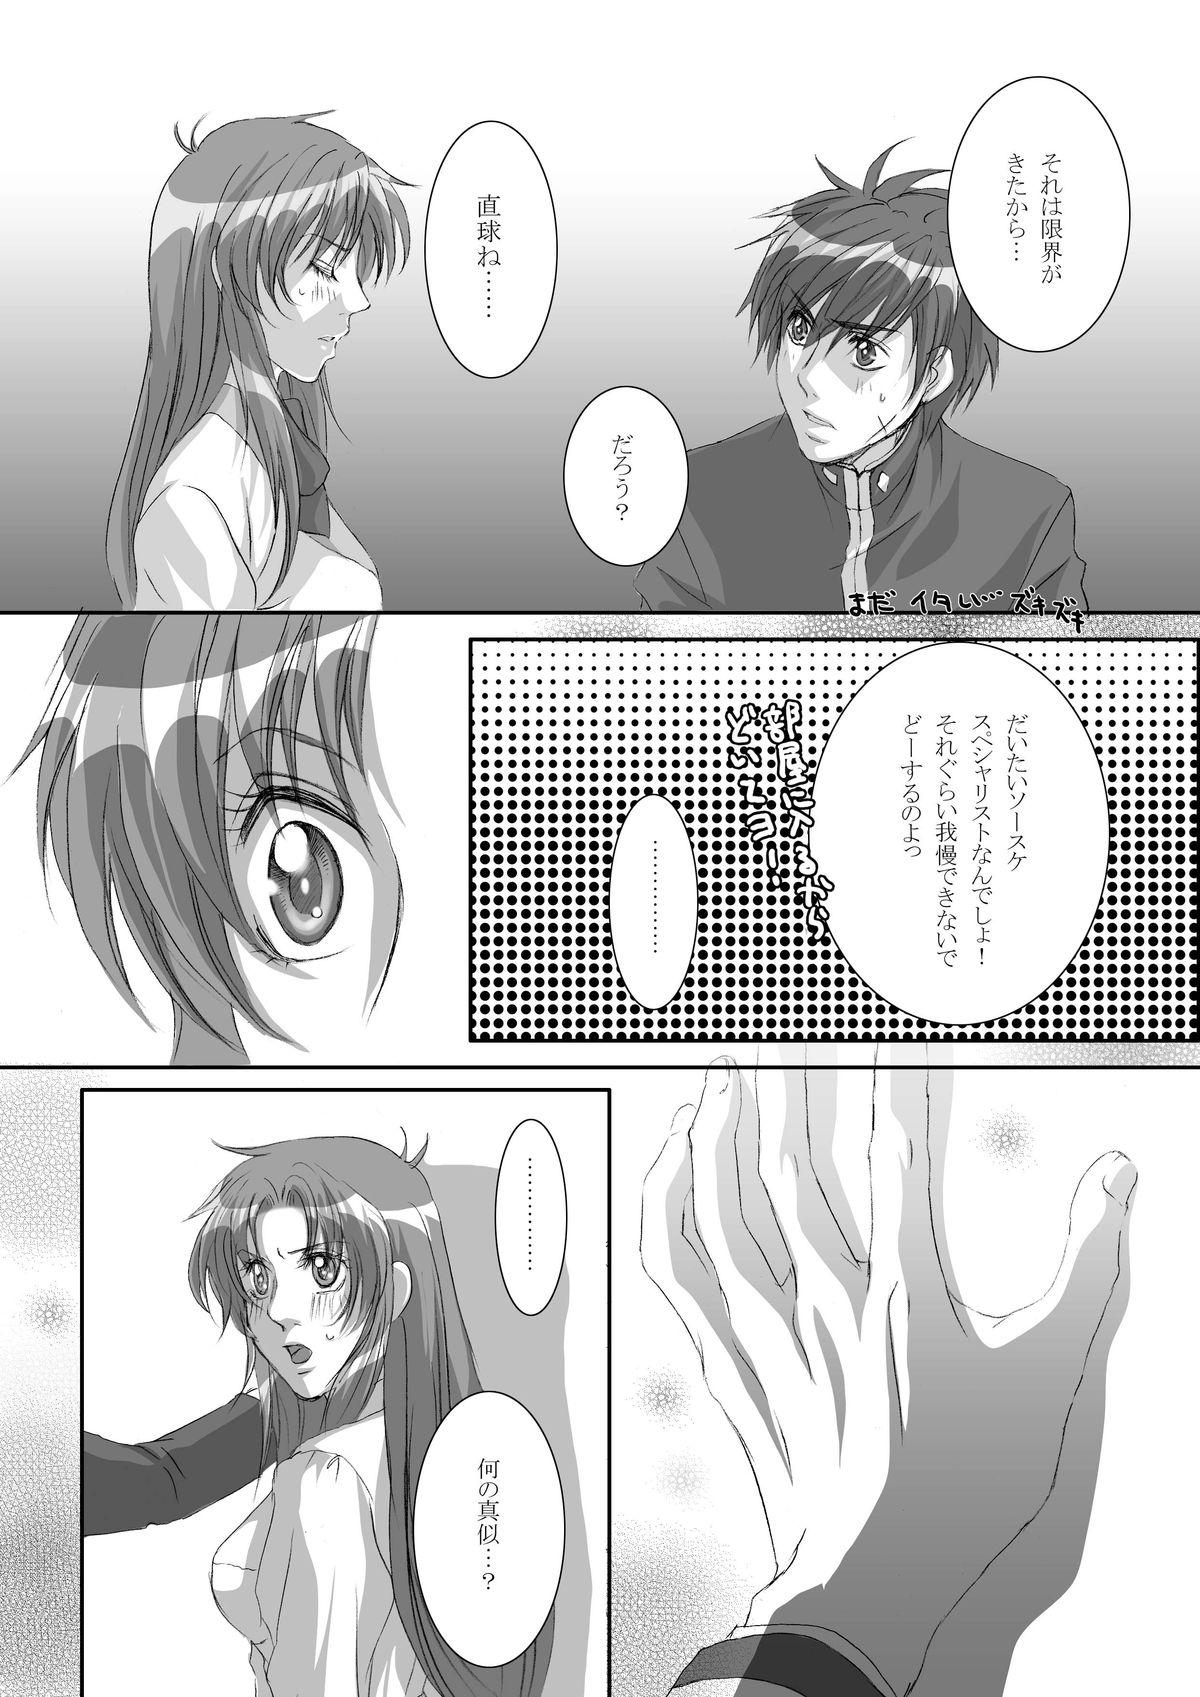 Messy Anjel Seven A7 - Full metal panic Hot Girl Fuck - Page 7